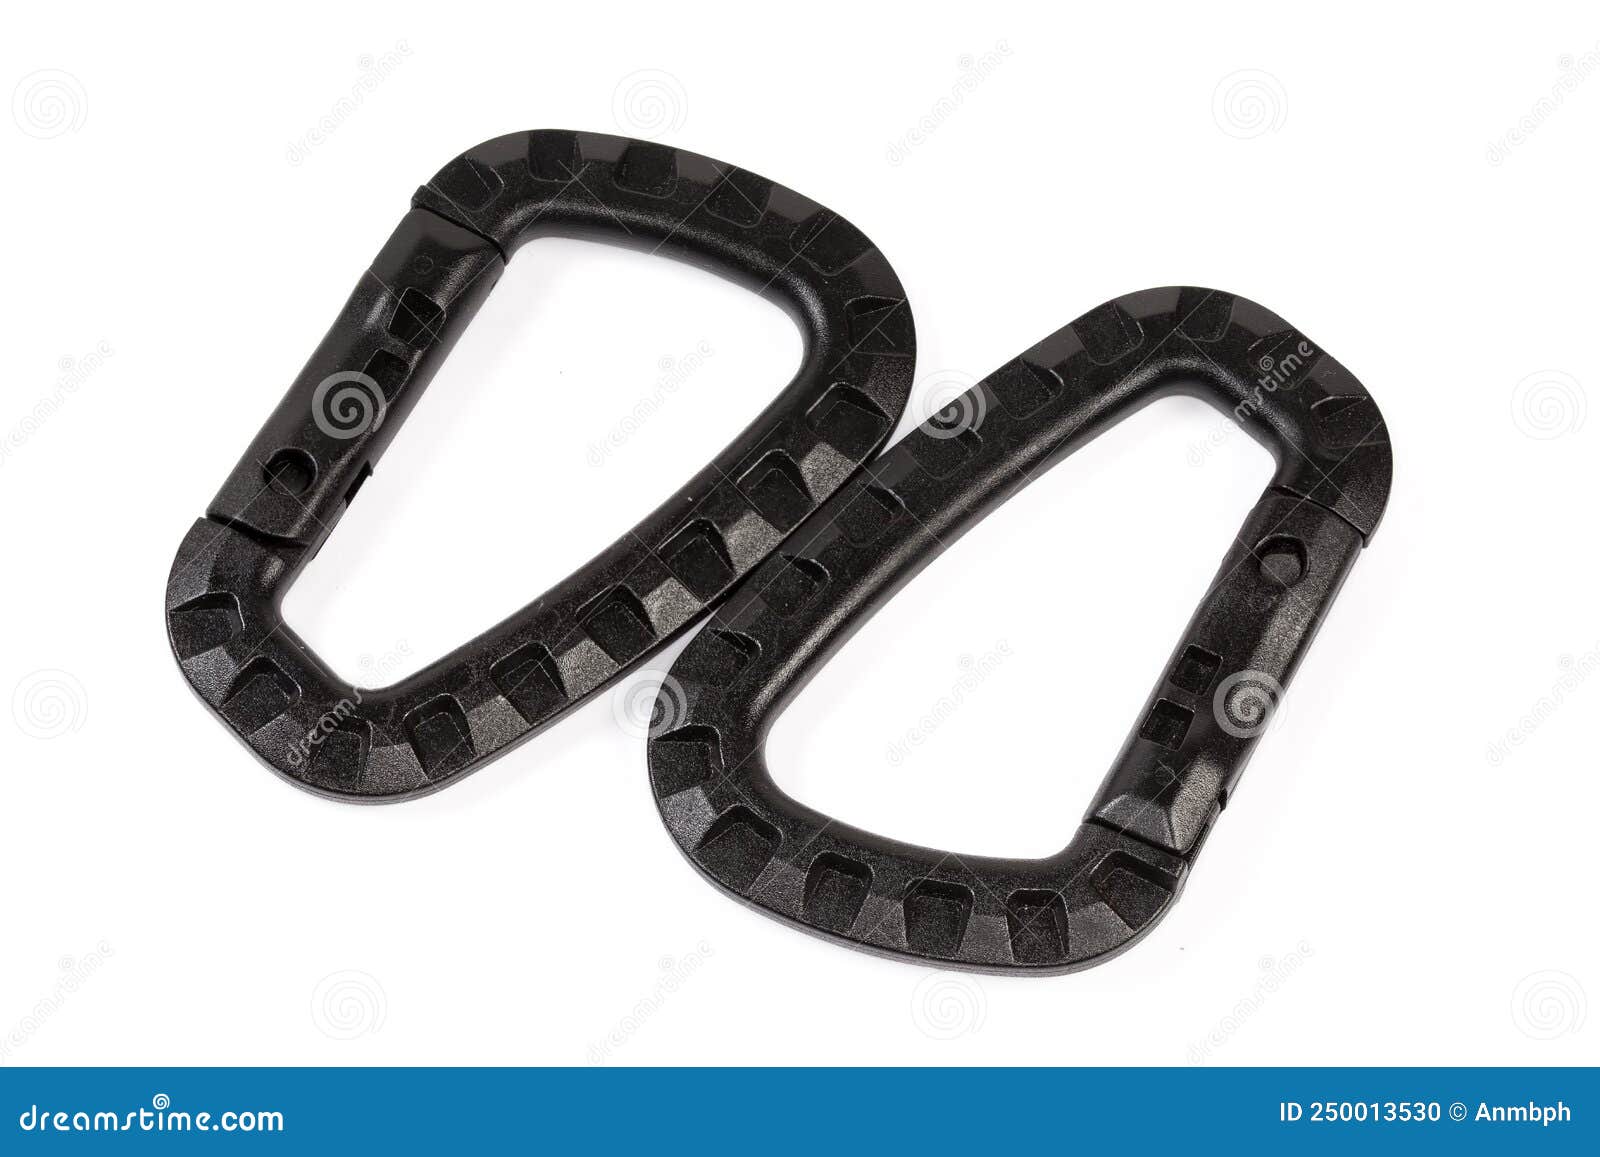 https://thumbs.dreamstime.com/z/two-small-plastic-snap-hooks-white-background-black-strong-non-locking-250013530.jpg